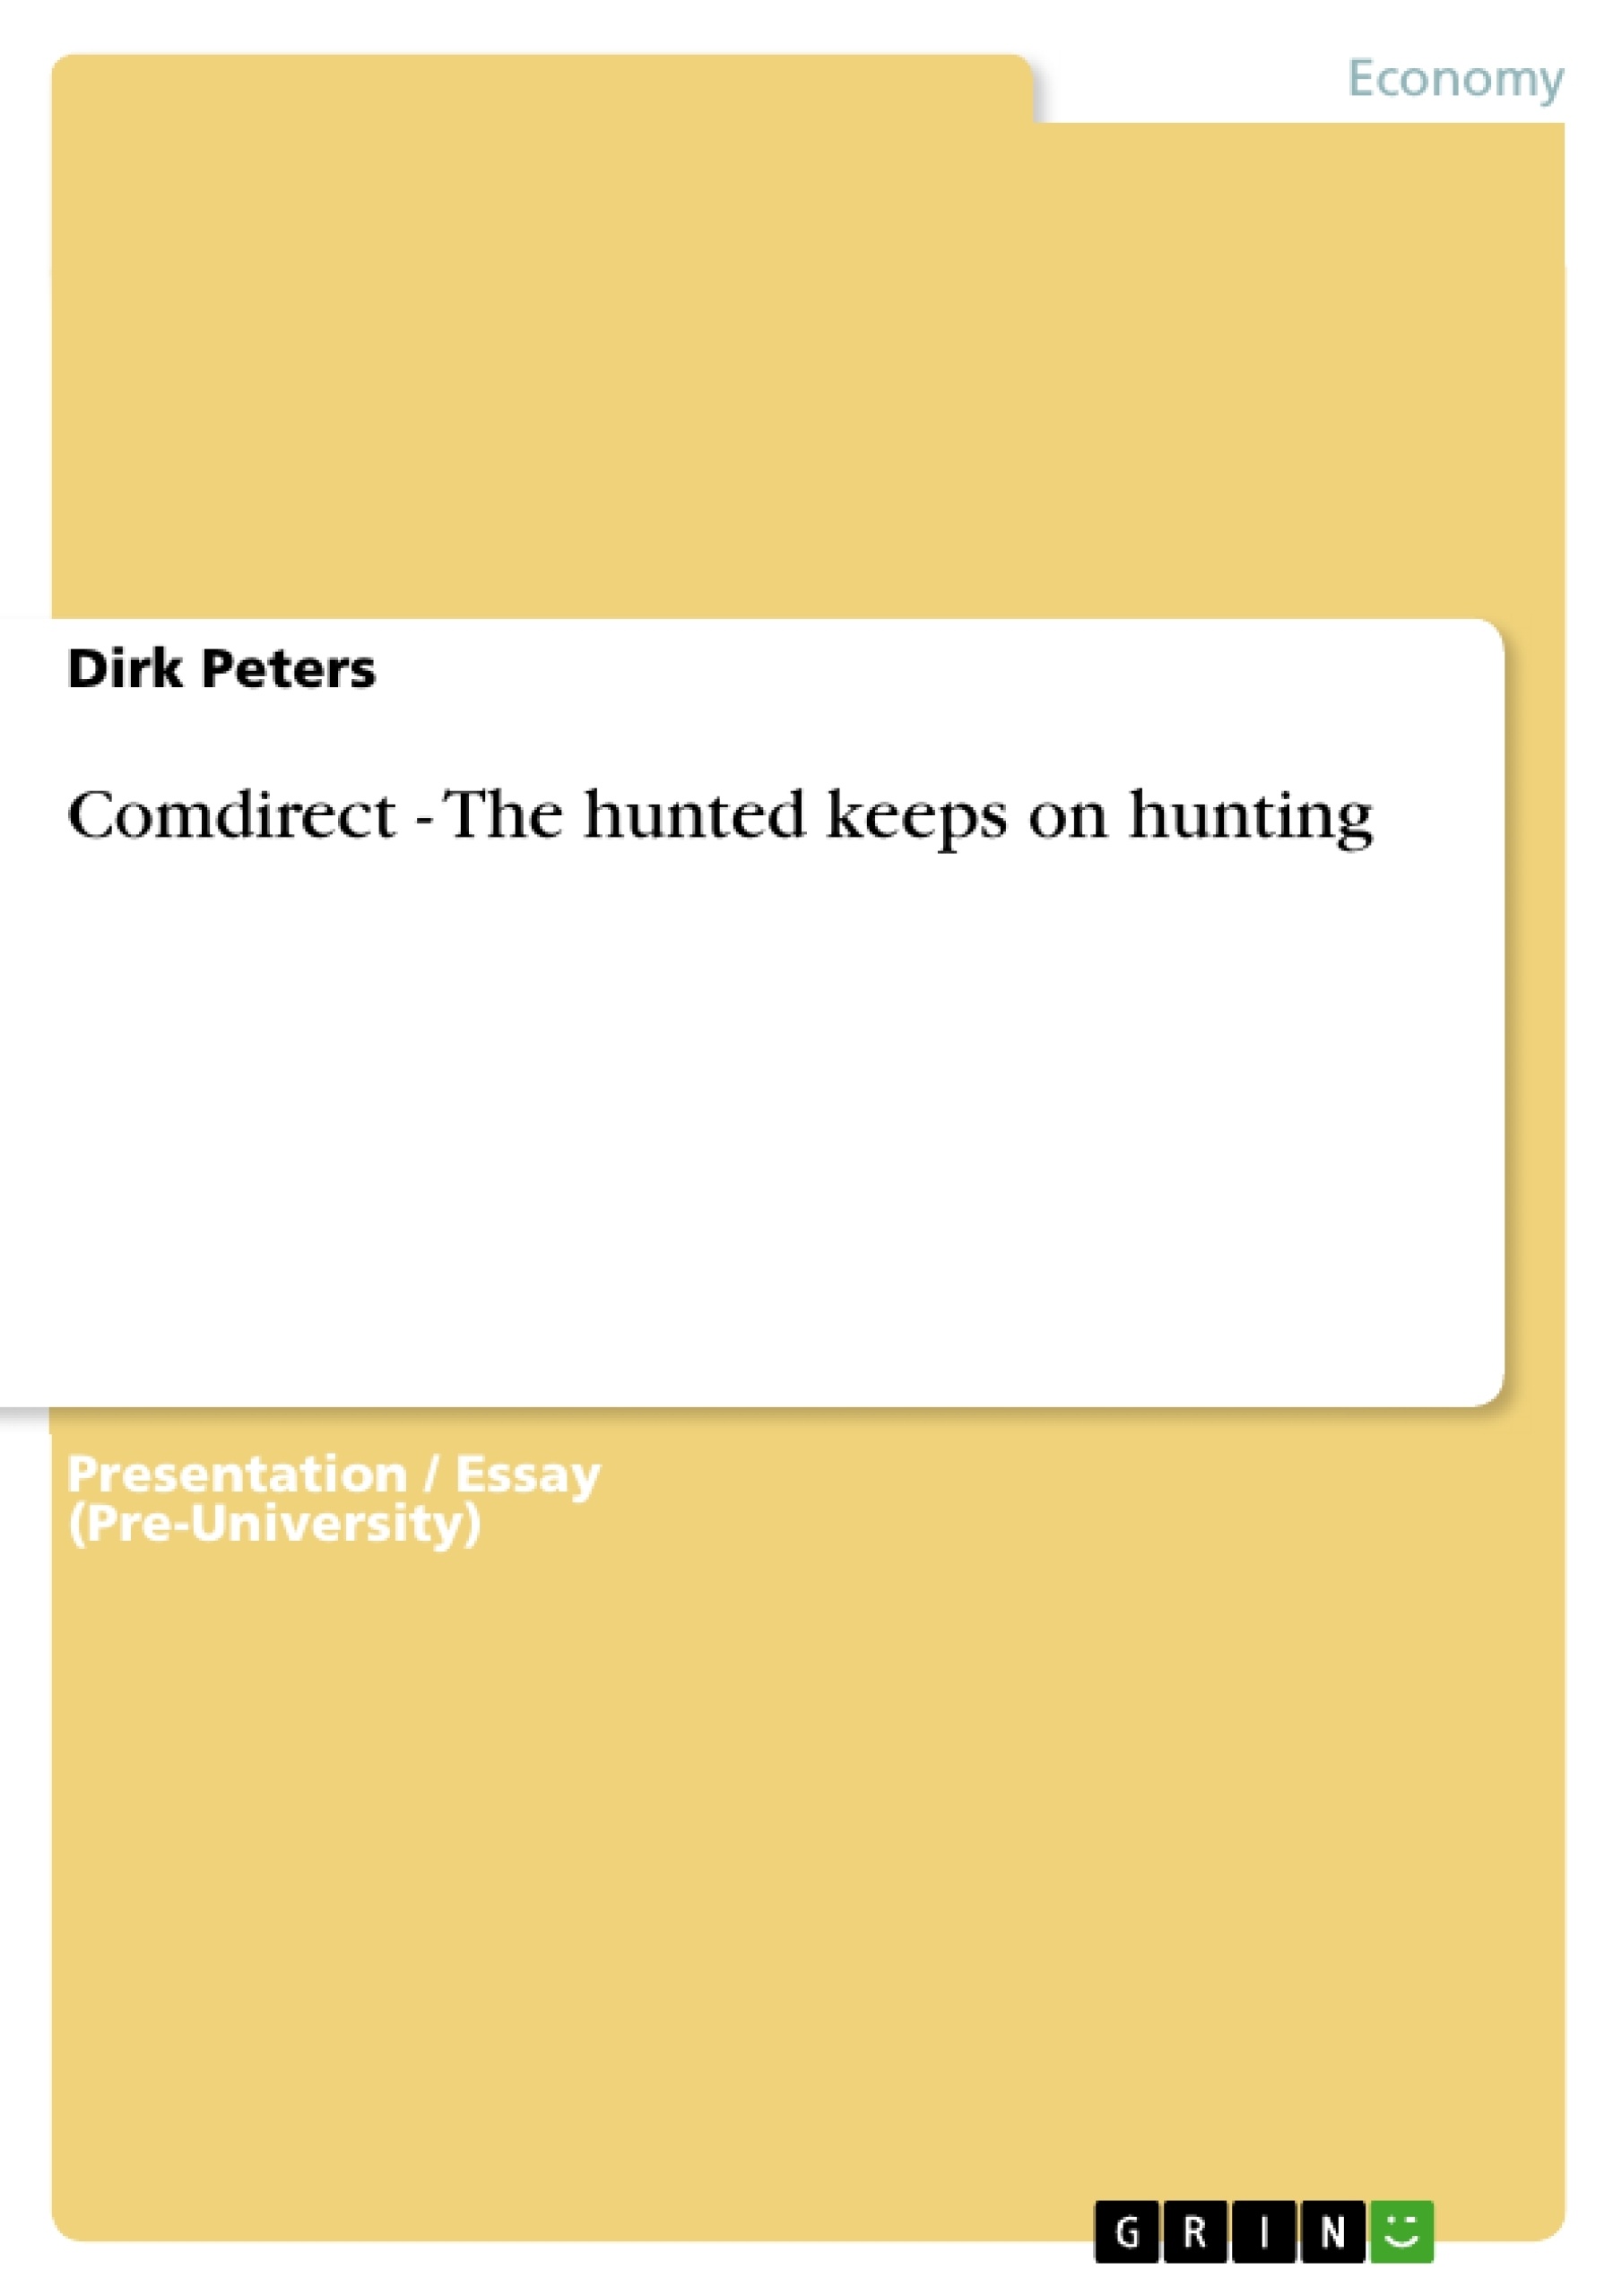 Title: Comdirect - The hunted keeps on hunting